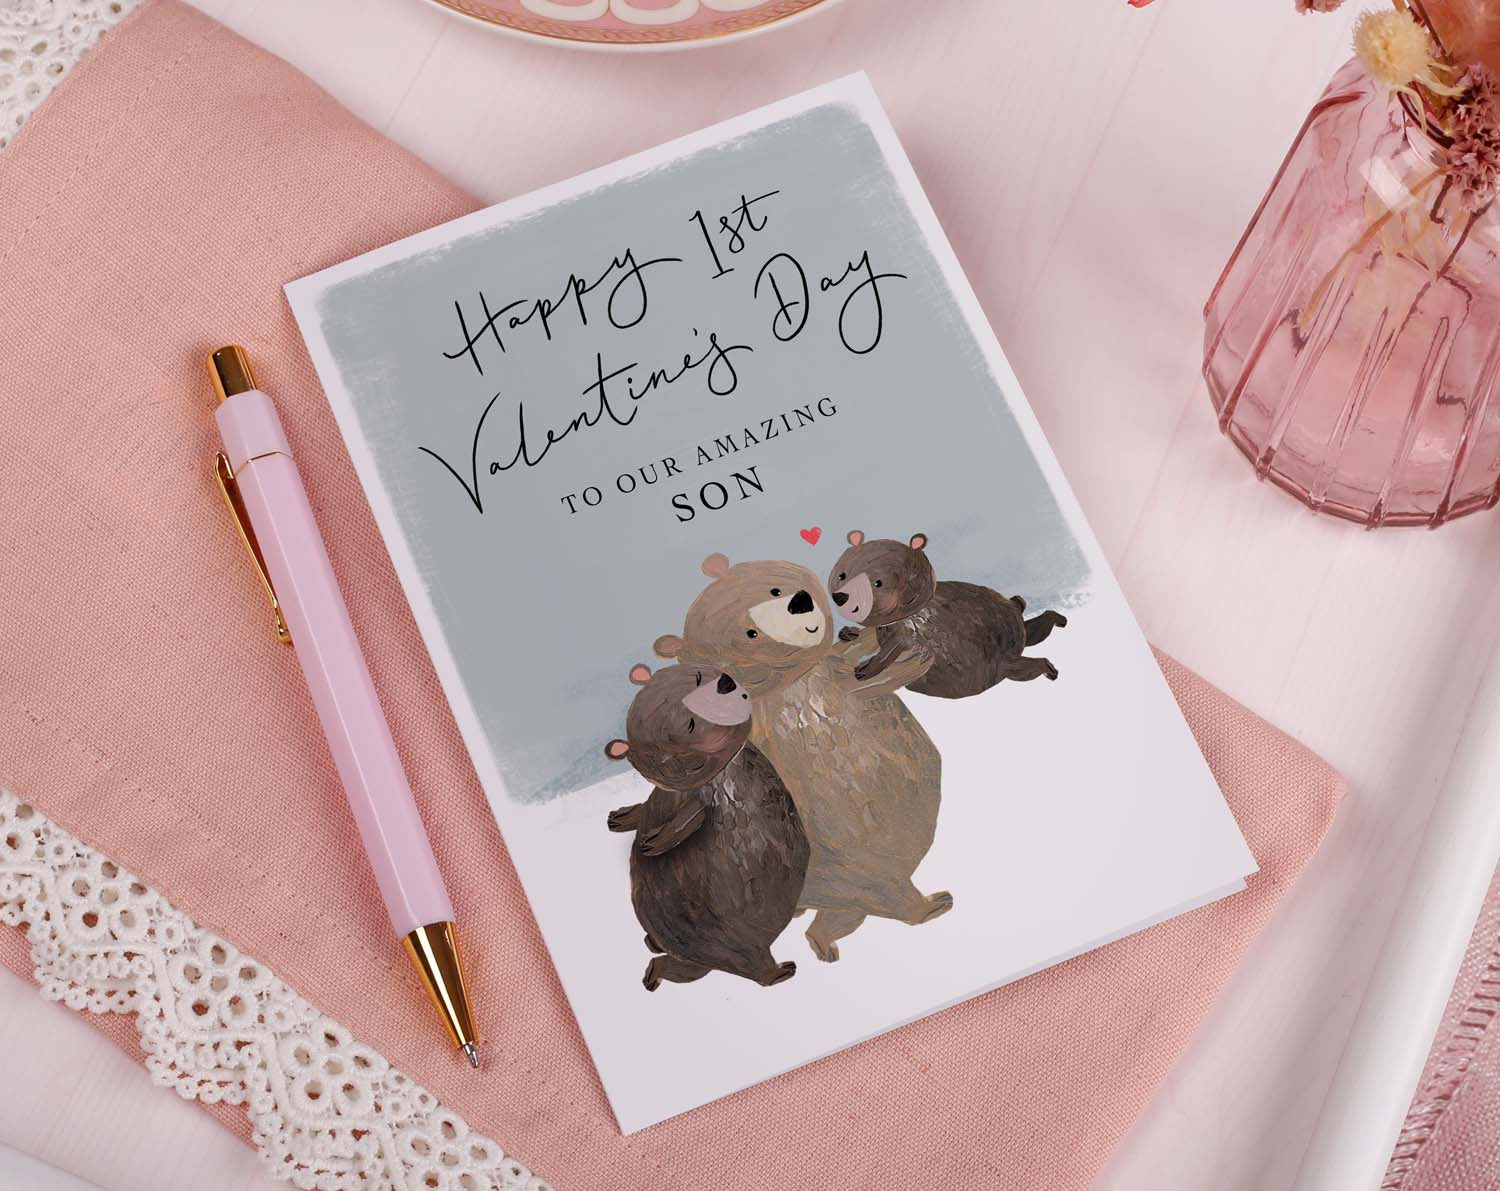 Bear 1st Valentine Card for your Son